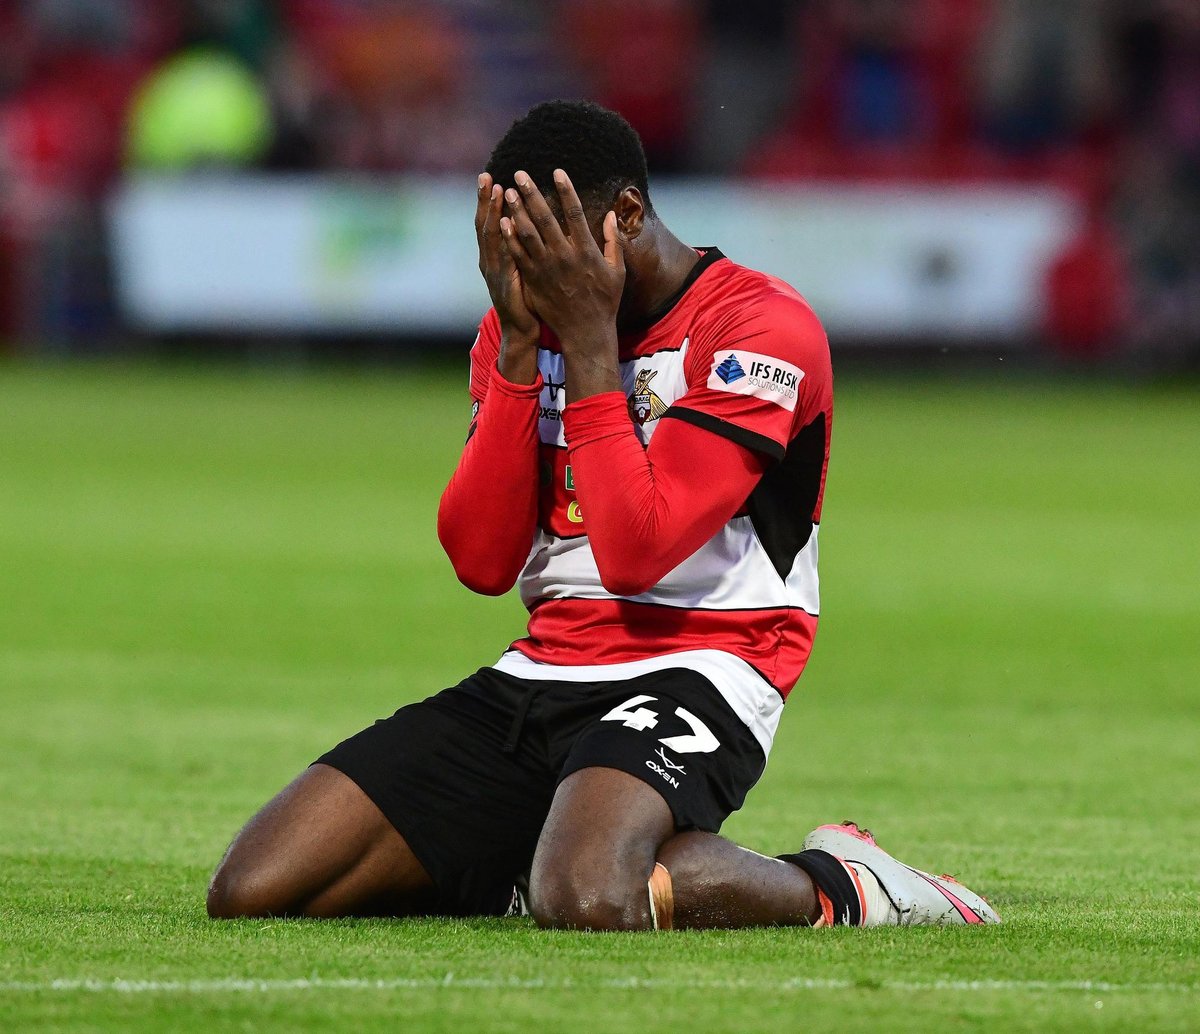 Doncaster Rovers suffer cruellest of endings as mesmeric run comes to a crashing halt